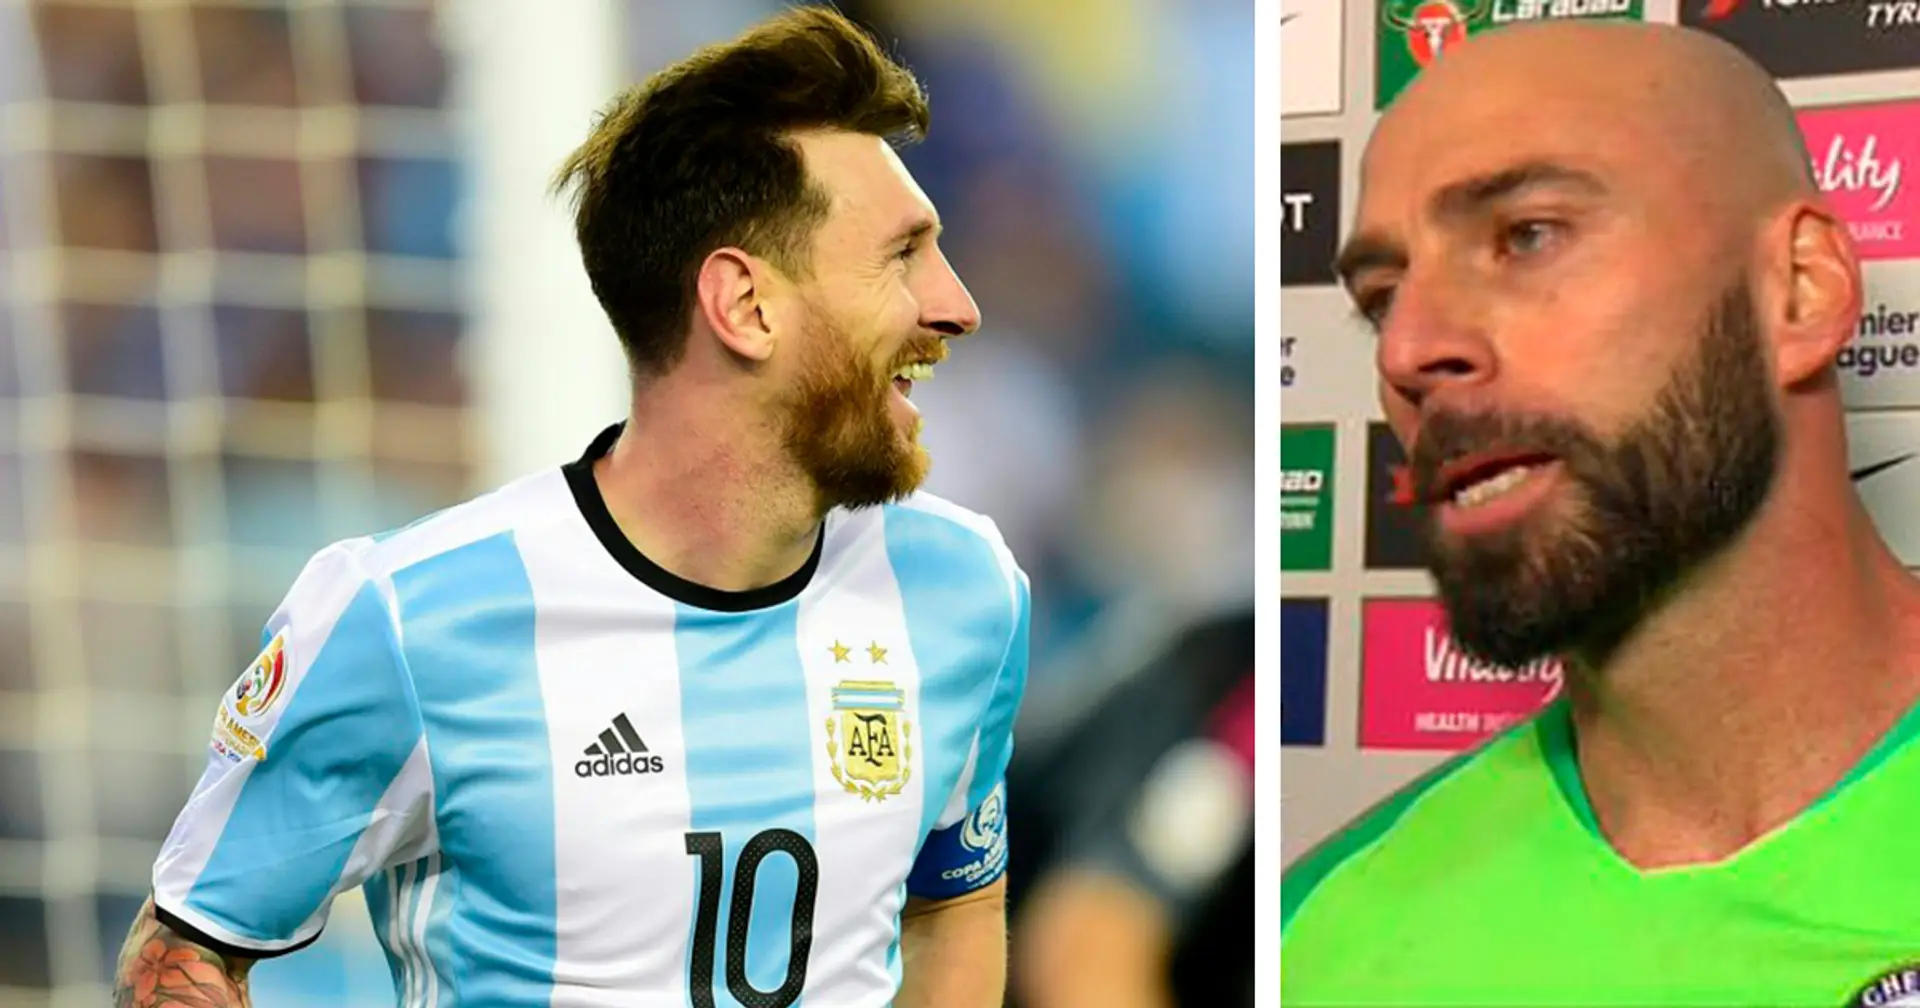 'Messi goes out to assassinate goalkeepers. He doesn't care if you're his friend': Willy Caballero